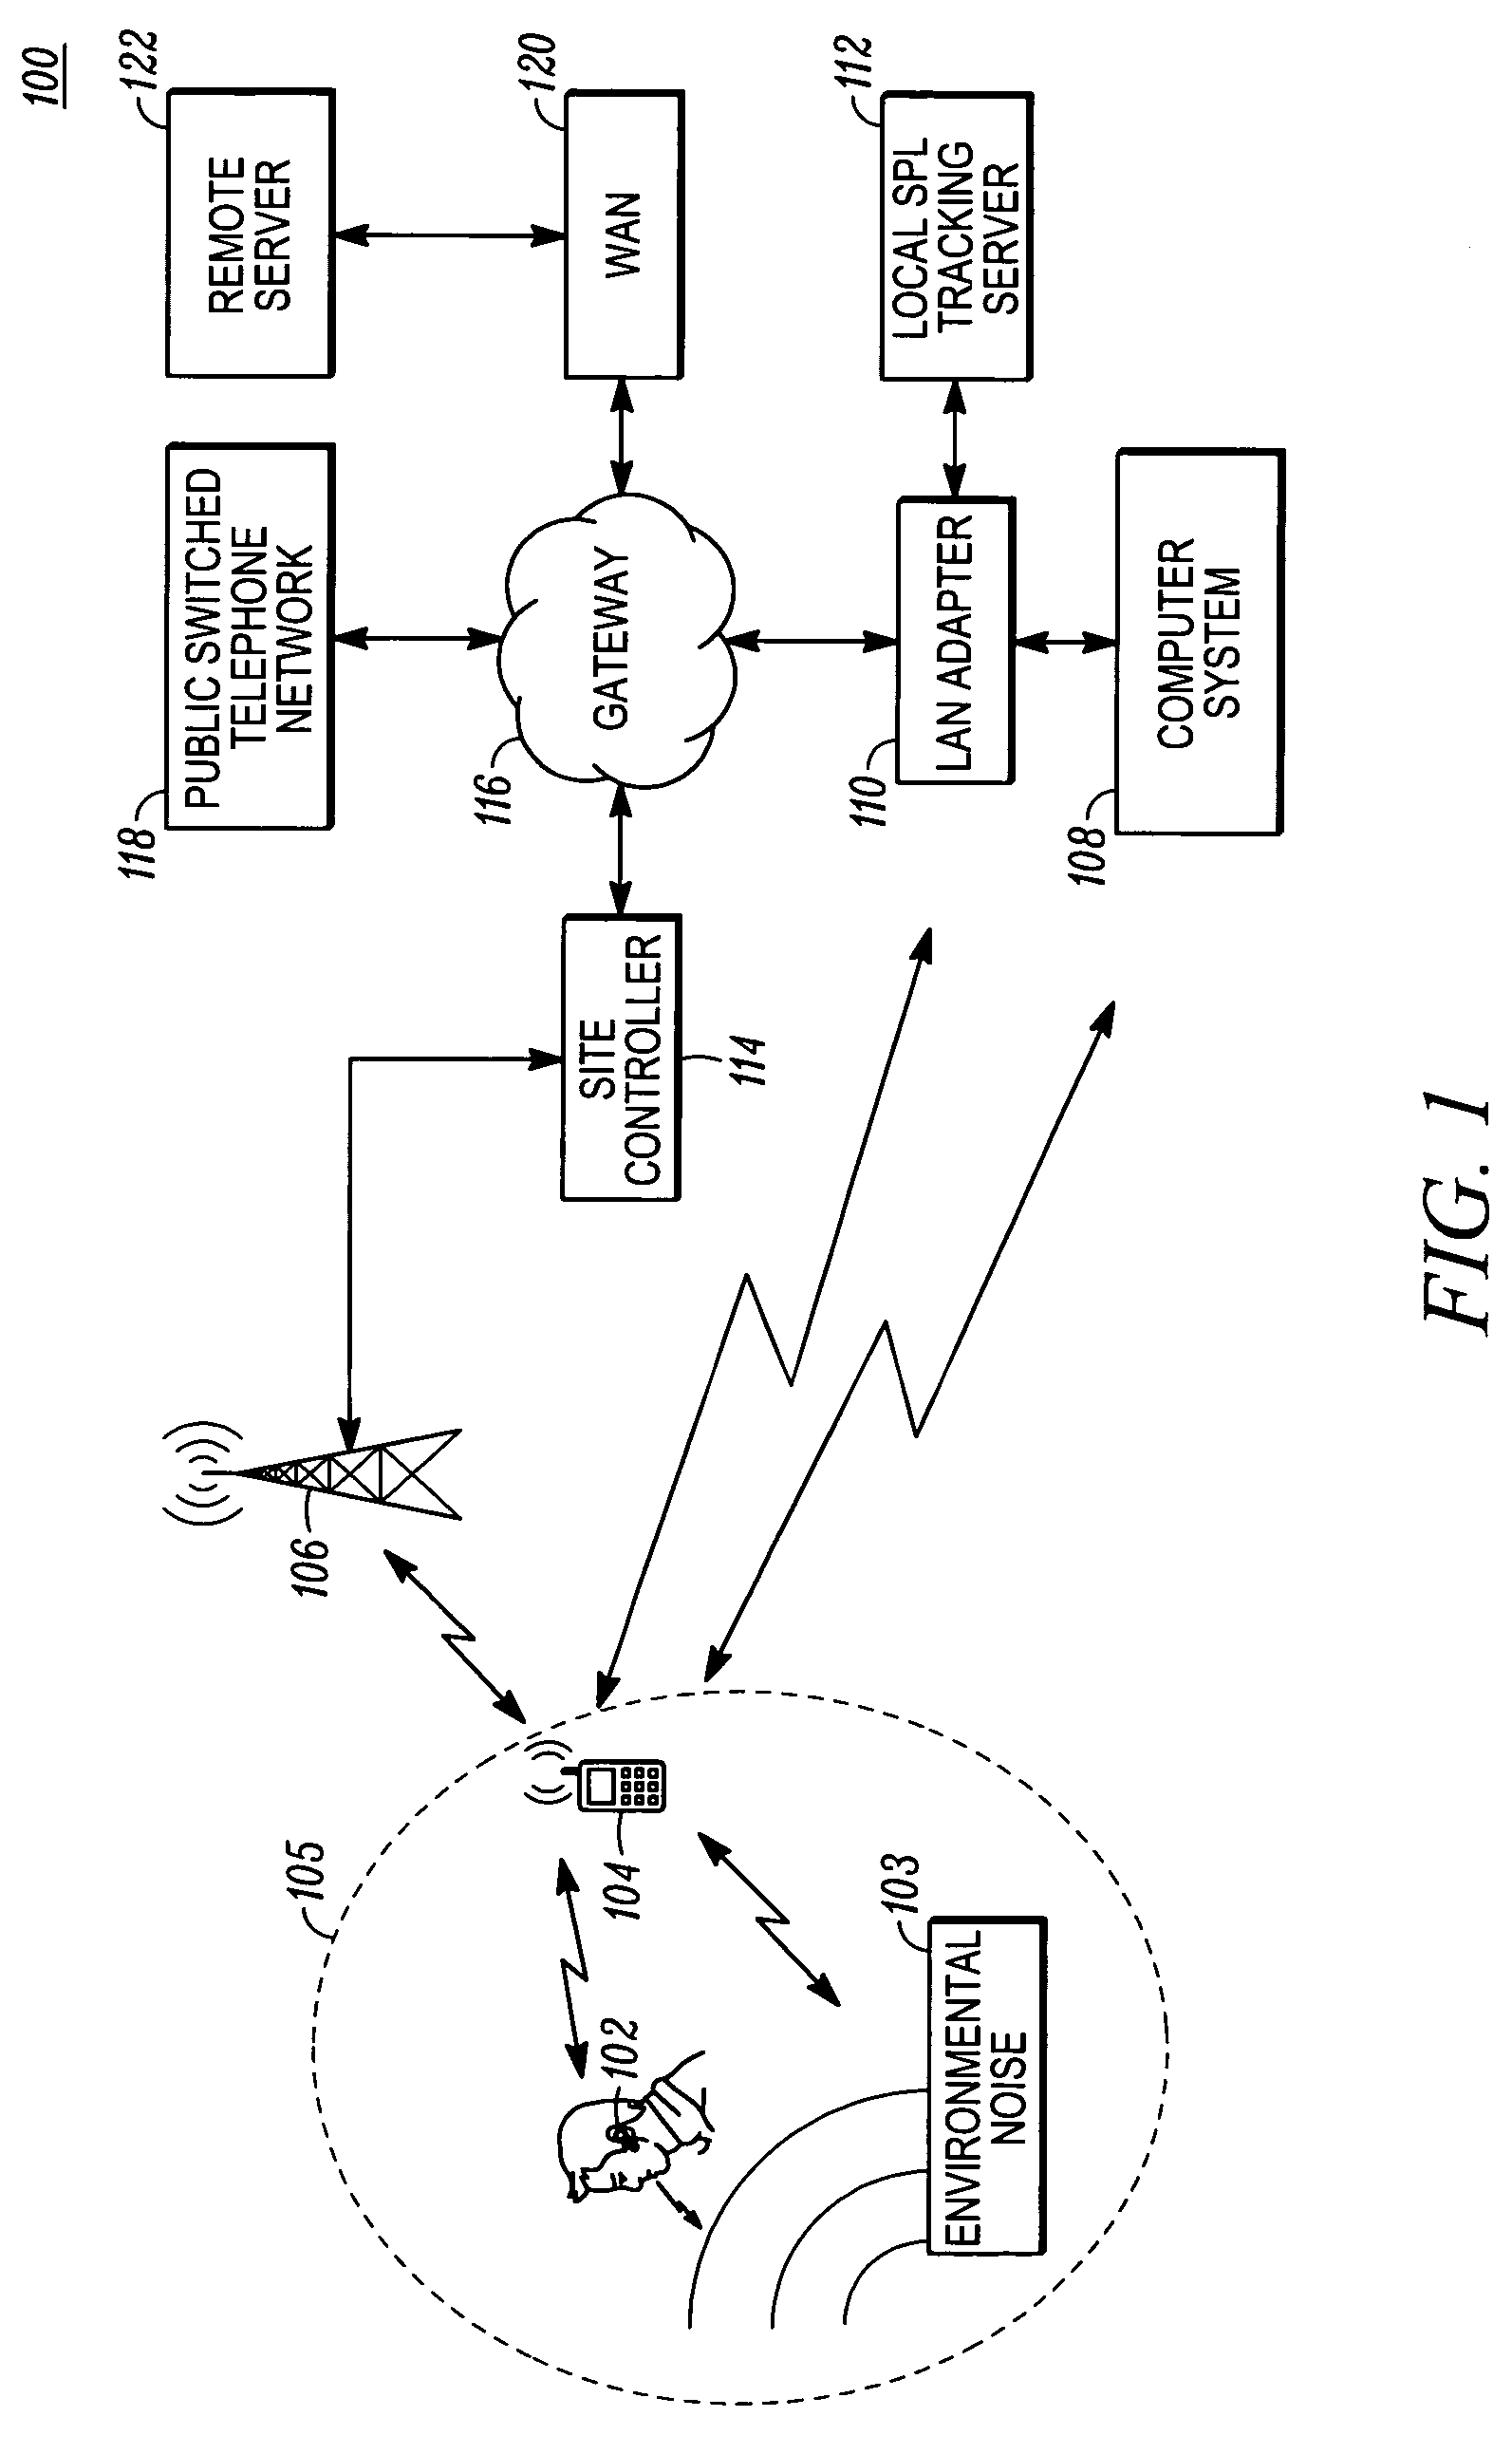 Method for autonomously monitoring and reporting sound pressure level (SPL) exposure for a user of a communication device